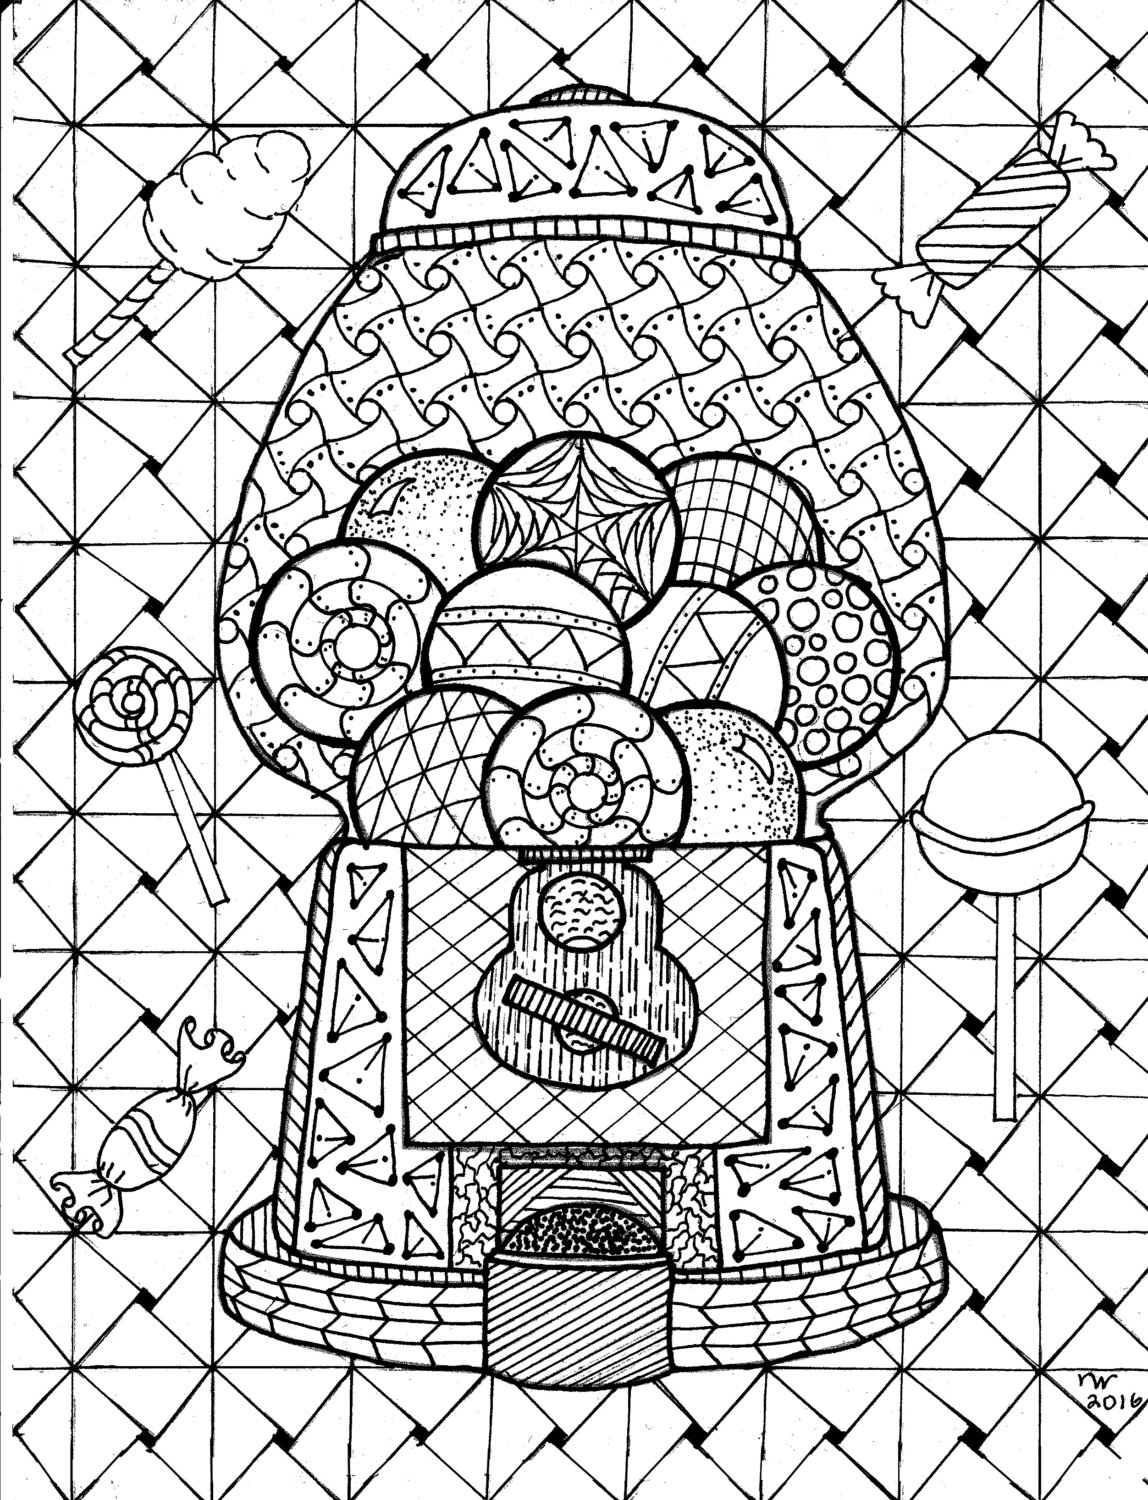 gumball-machine-coloring-page-at-getcolorings-free-printable